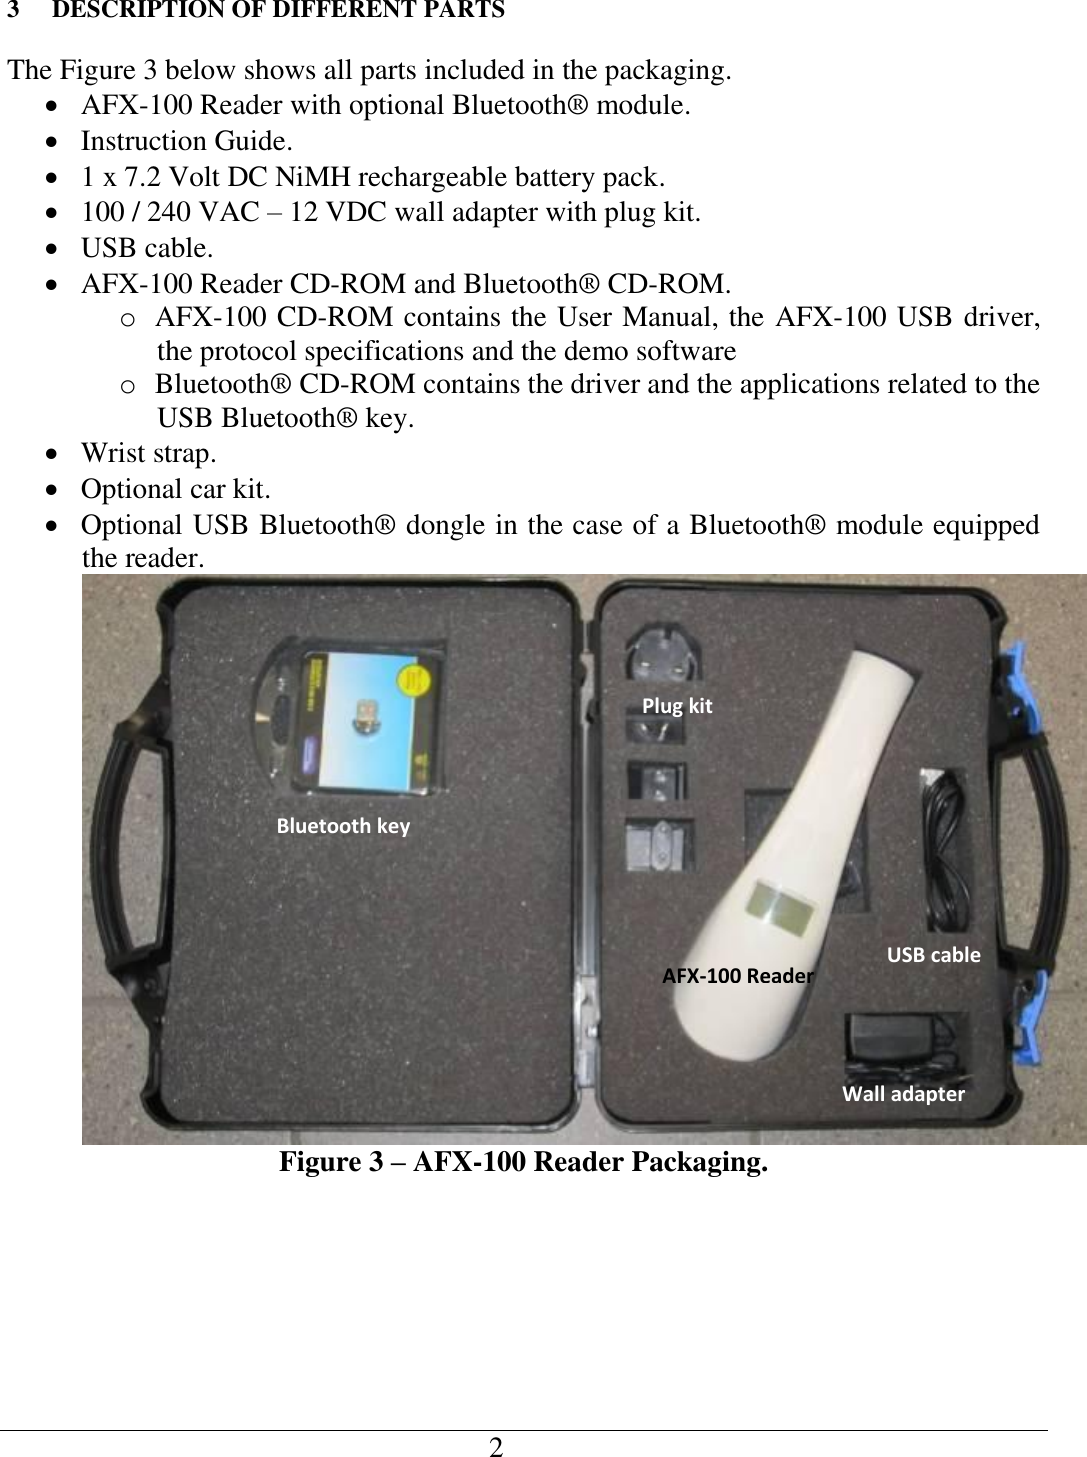   2   3 DESCRIPTION OF DIFFERENT PARTS The Figure 3 below shows all parts included in the packaging.  AFX-100 Reader with optional Bluetooth® module.  Instruction Guide.  1 x 7.2 Volt DC NiMH rechargeable battery pack.  100 / 240 VAC – 12 VDC wall adapter with plug kit.  USB cable.  AFX-100 Reader CD-ROM and Bluetooth® CD-ROM. o AFX-100 CD-ROM contains the User Manual, the AFX-100 USB driver, the protocol specifications and the demo software o Bluetooth® CD-ROM contains the driver and the applications related to the USB Bluetooth® key.  Wrist strap.  Optional car kit.  Optional USB Bluetooth® dongle in the case of a Bluetooth® module equipped the reader.  Figure 3 – AFX-100 Reader Packaging. USB cable Wall adapter Bluetooth key Plug kit AFX-100 Reader 